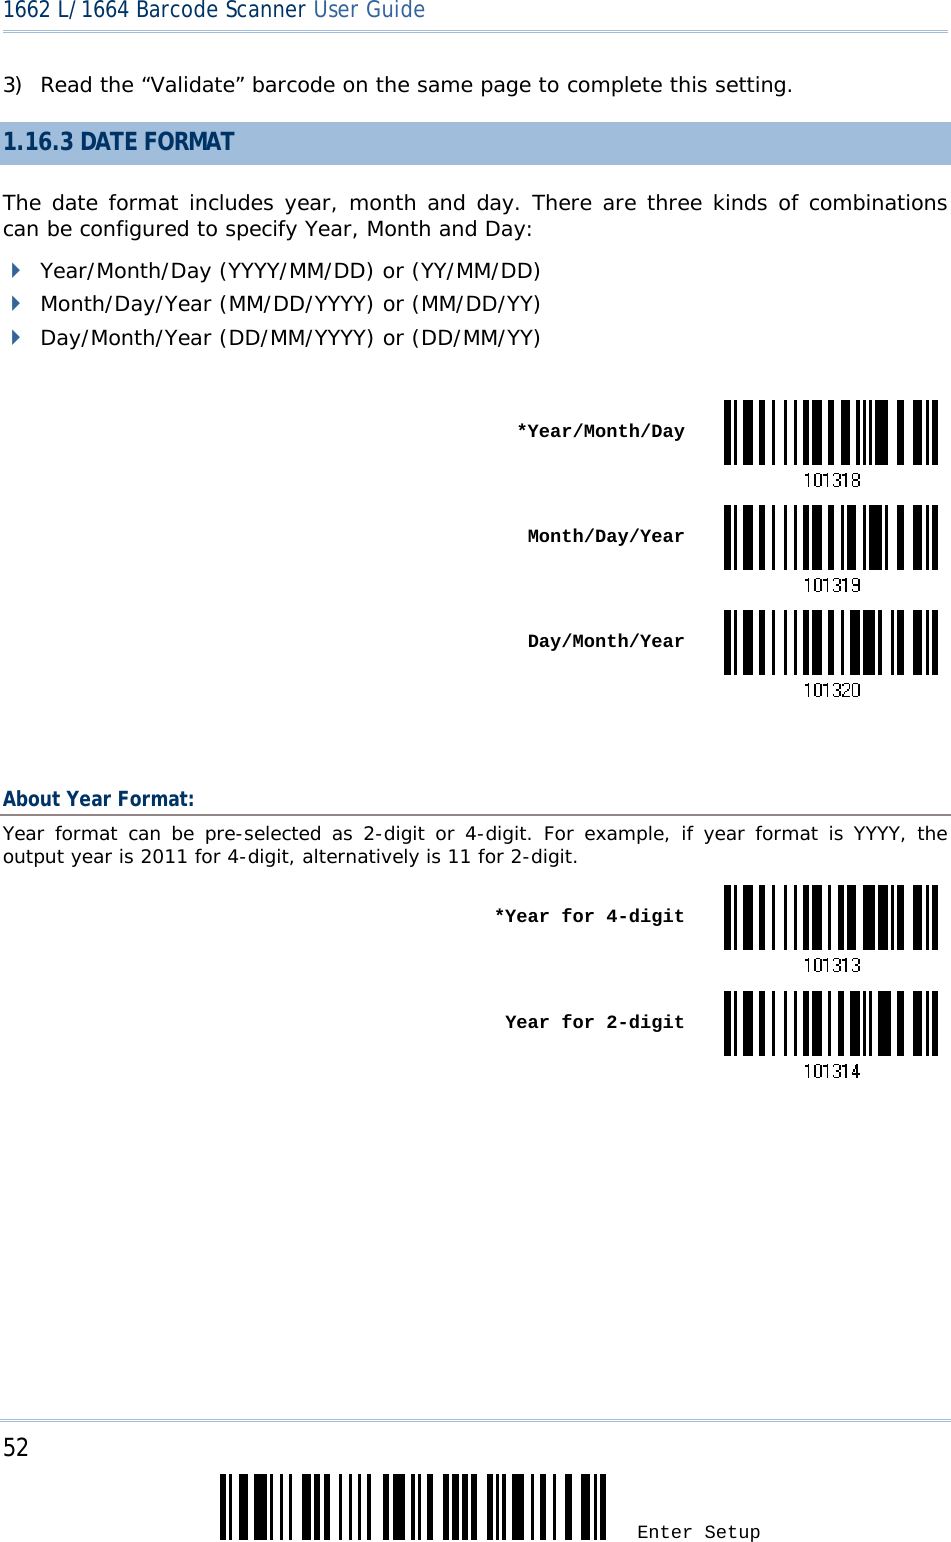 52 Enter Setup 1662 L/1664 Barcode Scanner User Guide  3) Read the “Validate” barcode on the same page to complete this setting. 1.16.3 DATE FORMAT The date format includes year, month and day. There are three kinds of combinations can be configured to specify Year, Month and Day:  Year/Month/Day (YYYY/MM/DD) or (YY/MM/DD)  Month/Day/Year (MM/DD/YYYY) or (MM/DD/YY)  Day/Month/Year (DD/MM/YYYY) or (DD/MM/YY)   *Year/Month/Day Month/Day/Year Day/Month/Year  About Year Format: Year format can be pre-selected as 2-digit or 4-digit. For example, if year format is YYYY, the output year is 2011 for 4-digit, alternatively is 11 for 2-digit.  *Year for 4-digit Year for 2-digit   